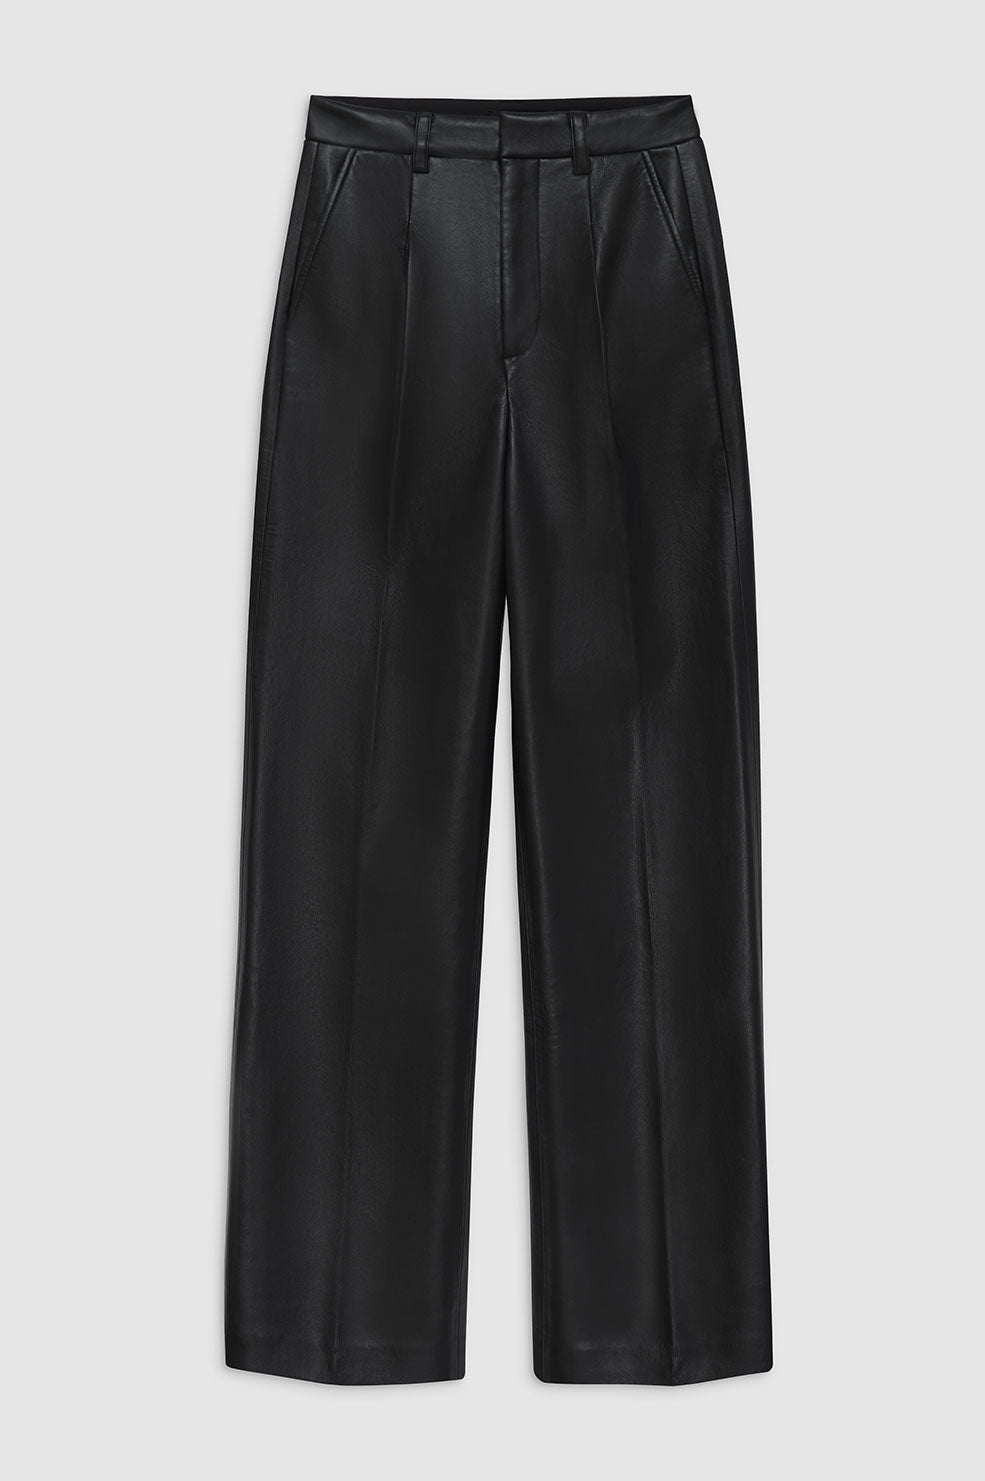 ANINE BING Carmen Pant - Black Recycled Leather - Front View